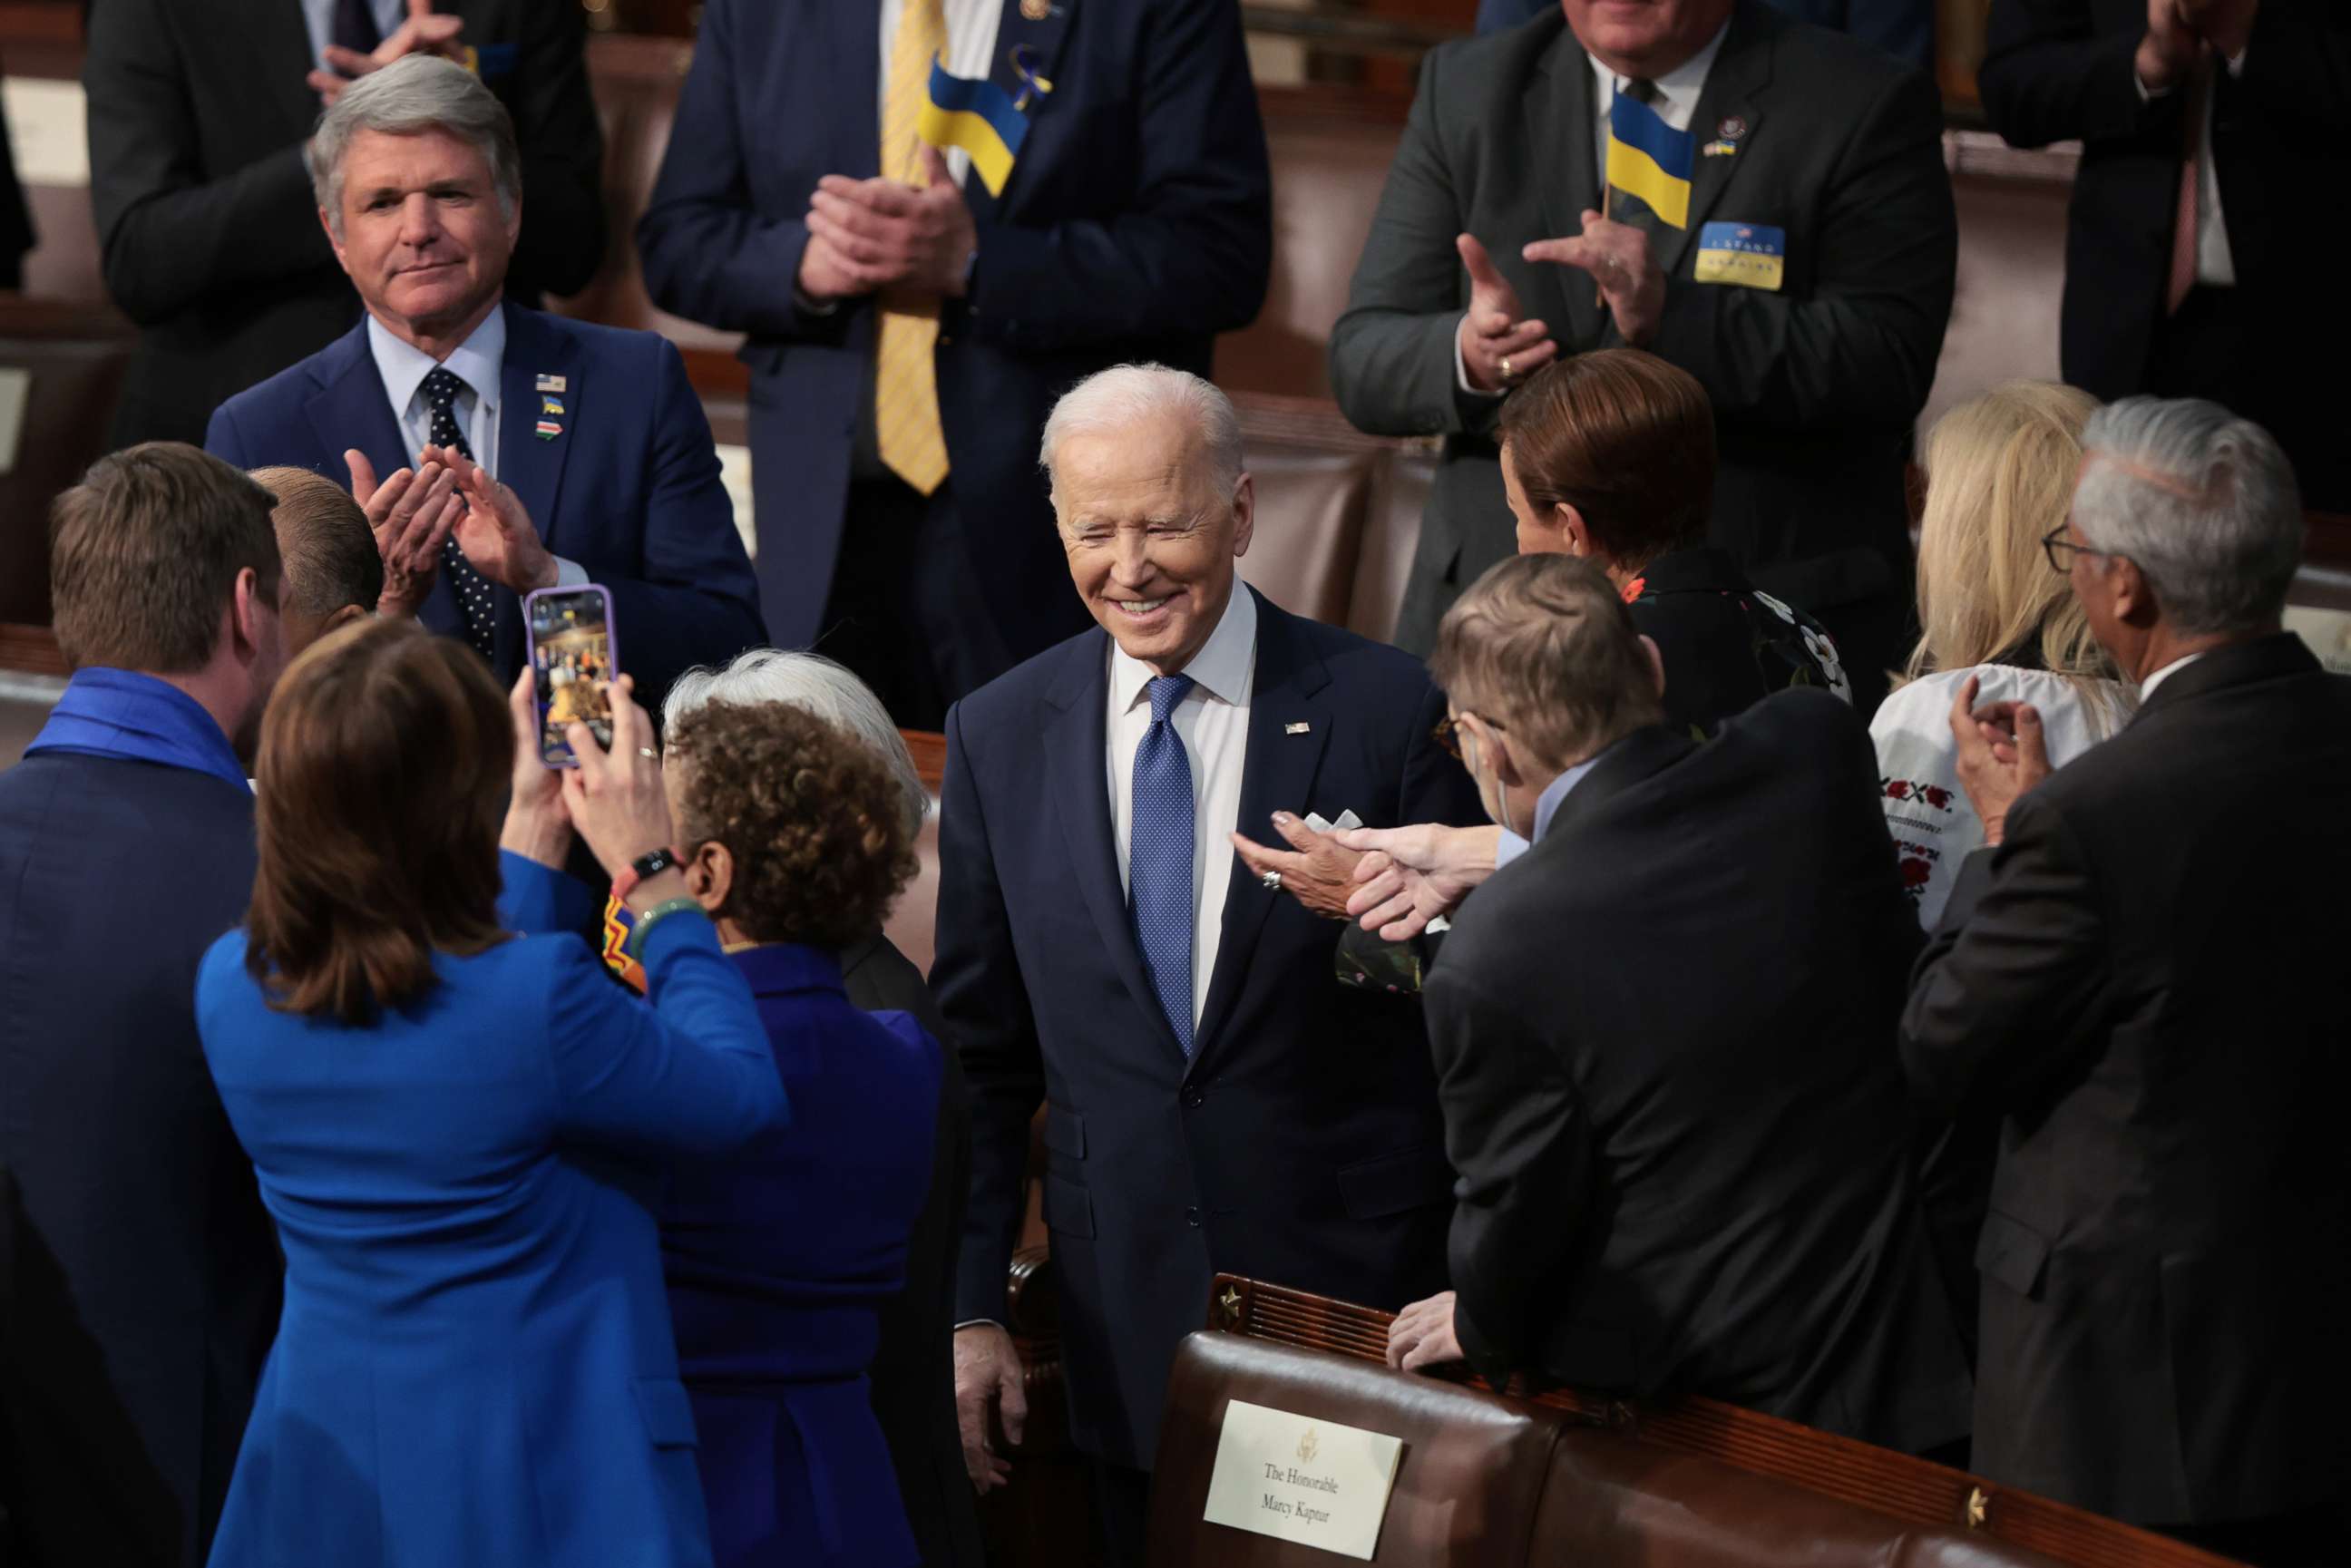 PHOTO: President Joe Biden arrives in the House Chamber to deliver the State of the Union address during a joint session of Congress in the U.S. Capitol's House Chamber, March 01, 2022 ,in Washington.